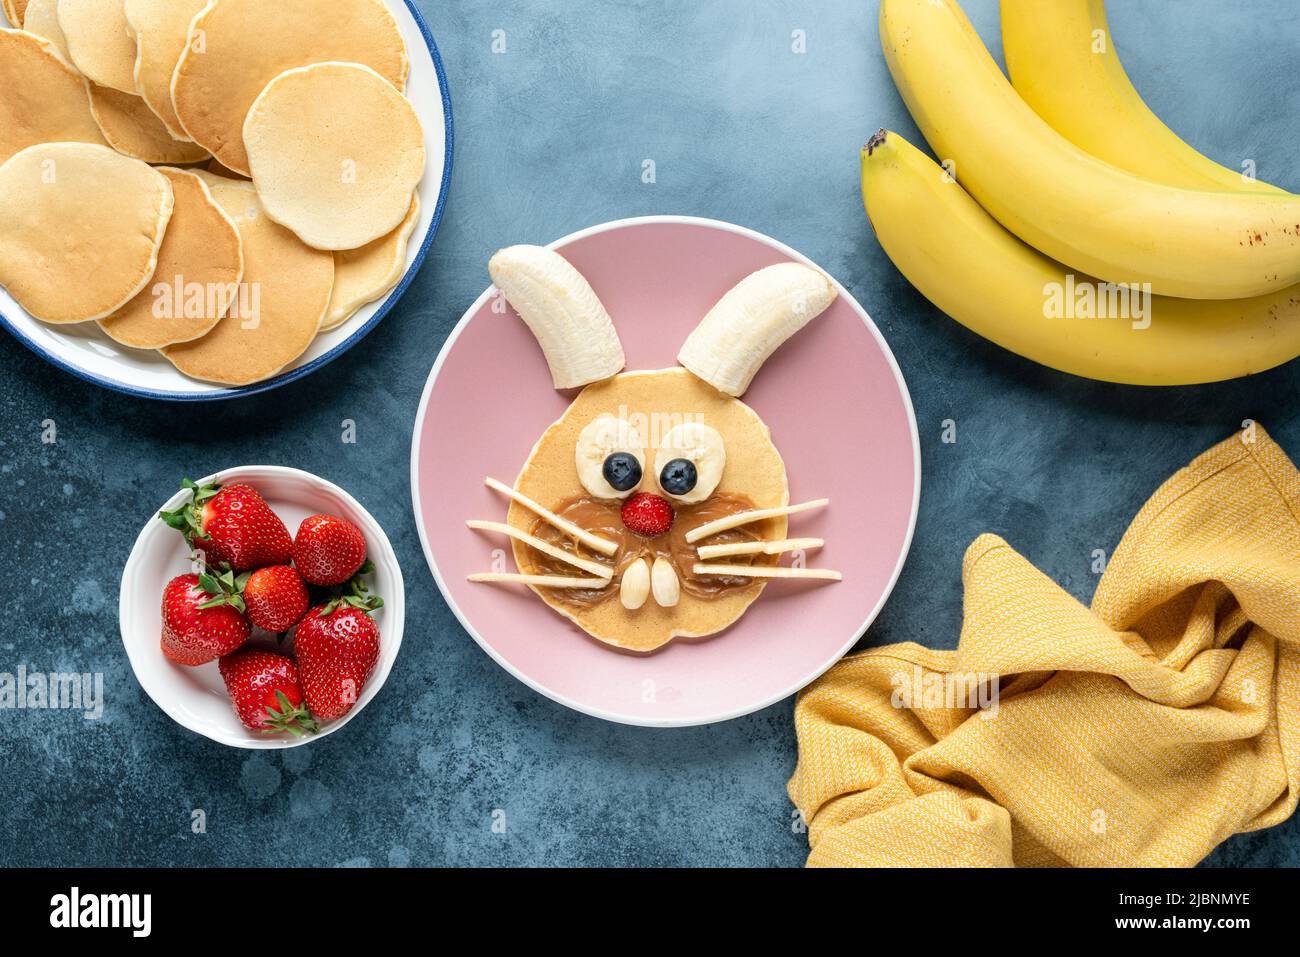 Funny breakfast kids pancake shaped as rabbit or bunny. Top view. Food art Stock Photo